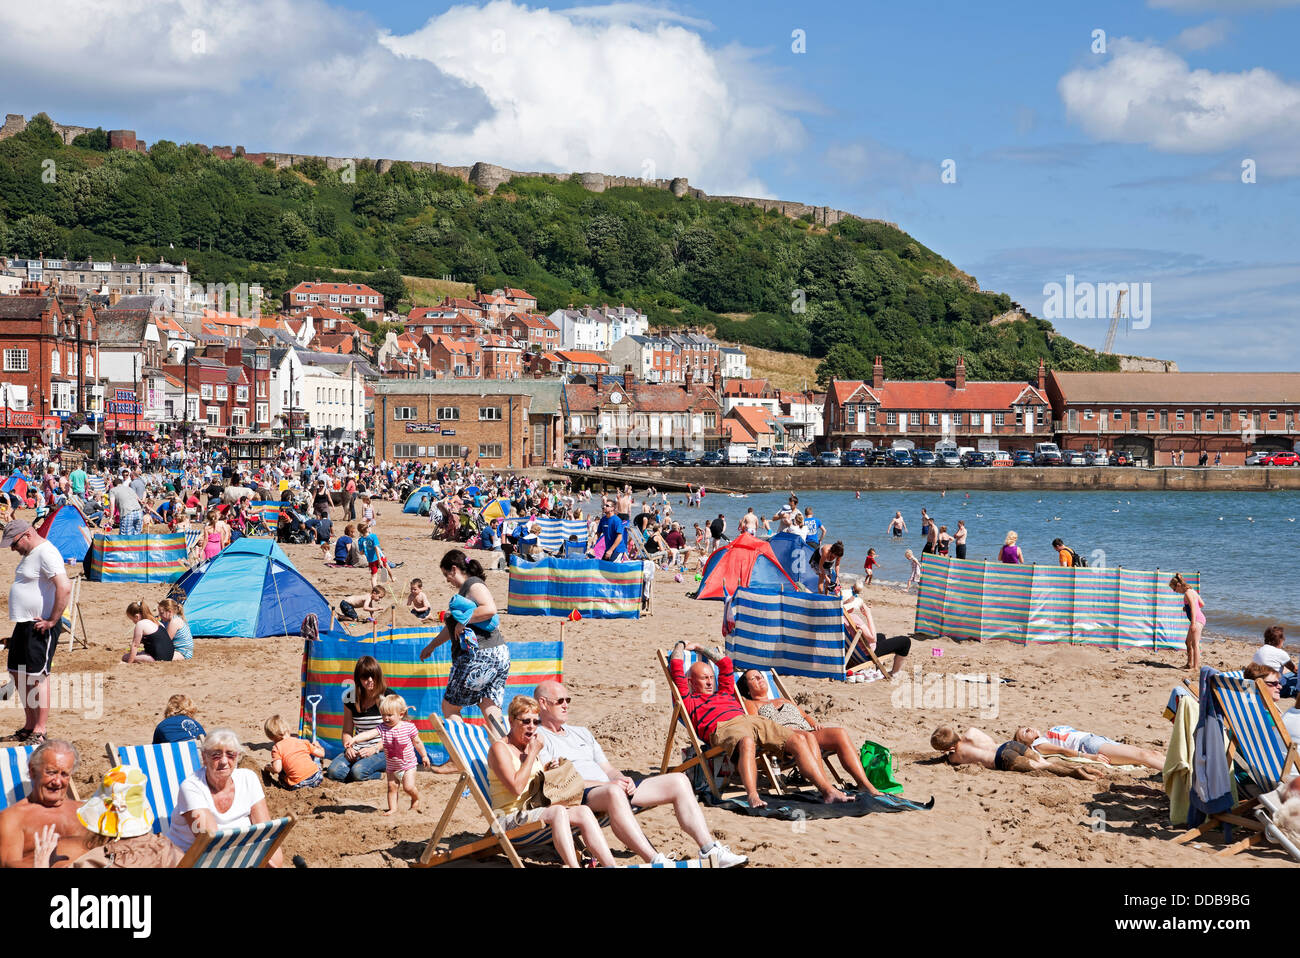 People tourists visitors sitting in deckchairs South Bay beach in summer Scarborough seafront coast resort North Yorkshire England UK GB Great Britain Stock Photo